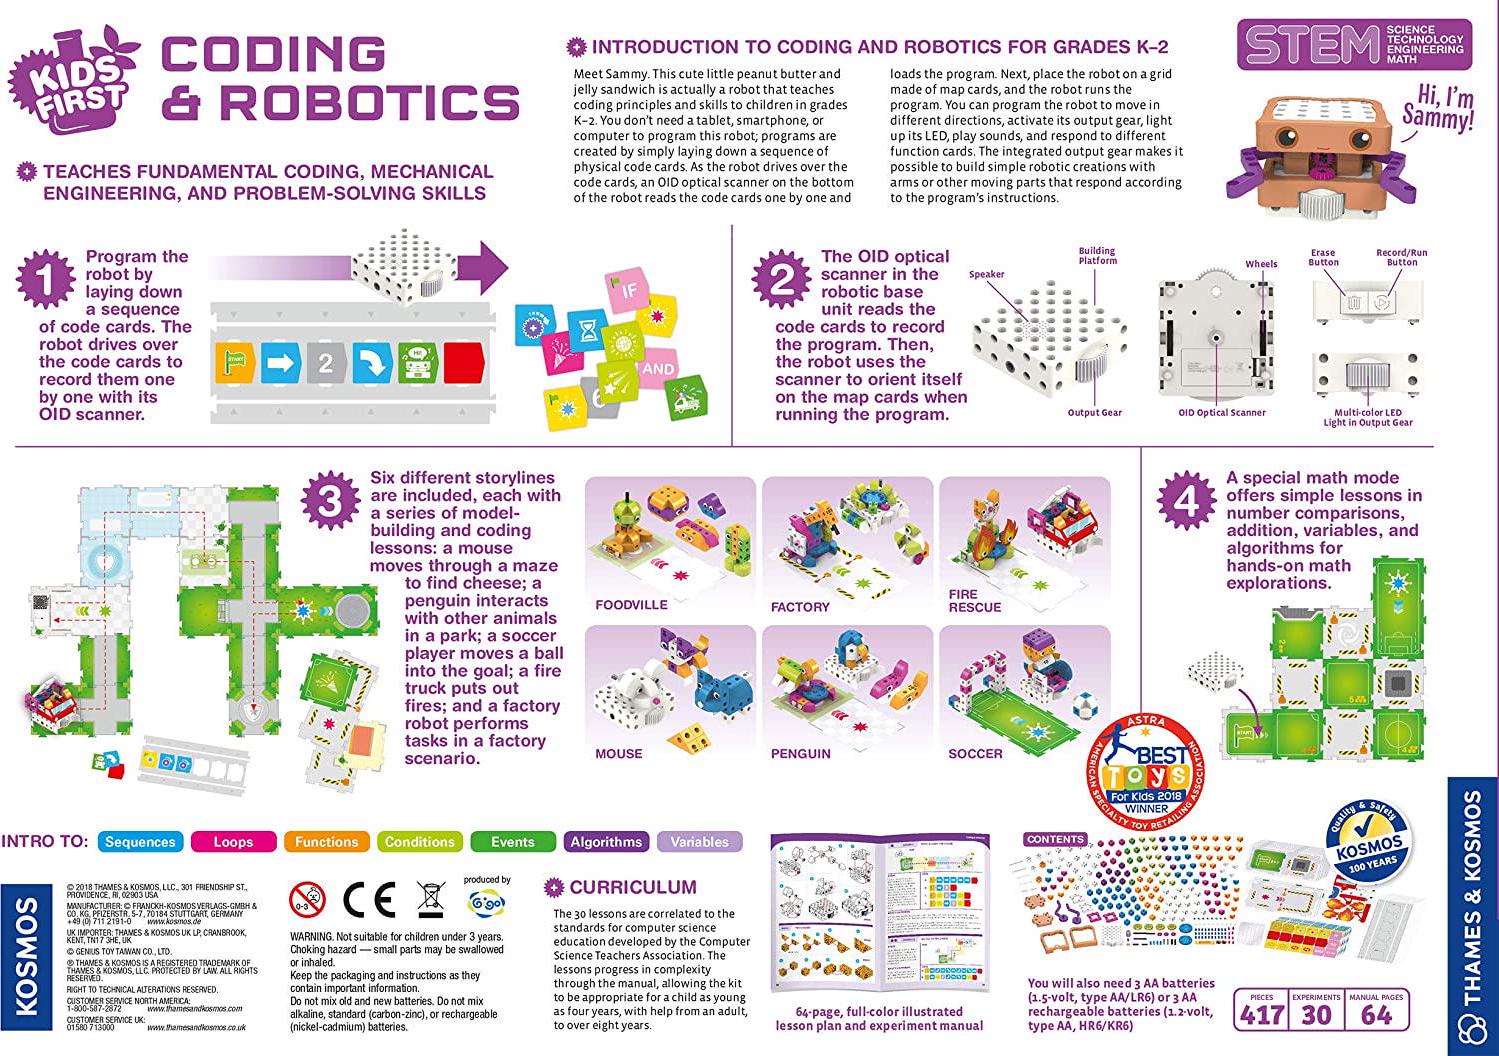 THAMES & KOSMOS, Kids First Coding and Robotics | No App Needed | Grades K-2 | Intro to Sequences, Loops, Functions, Conditions, Events, Algorithms, Variables | Parents Choice Gold Award Winner | by Thames and Kosmos